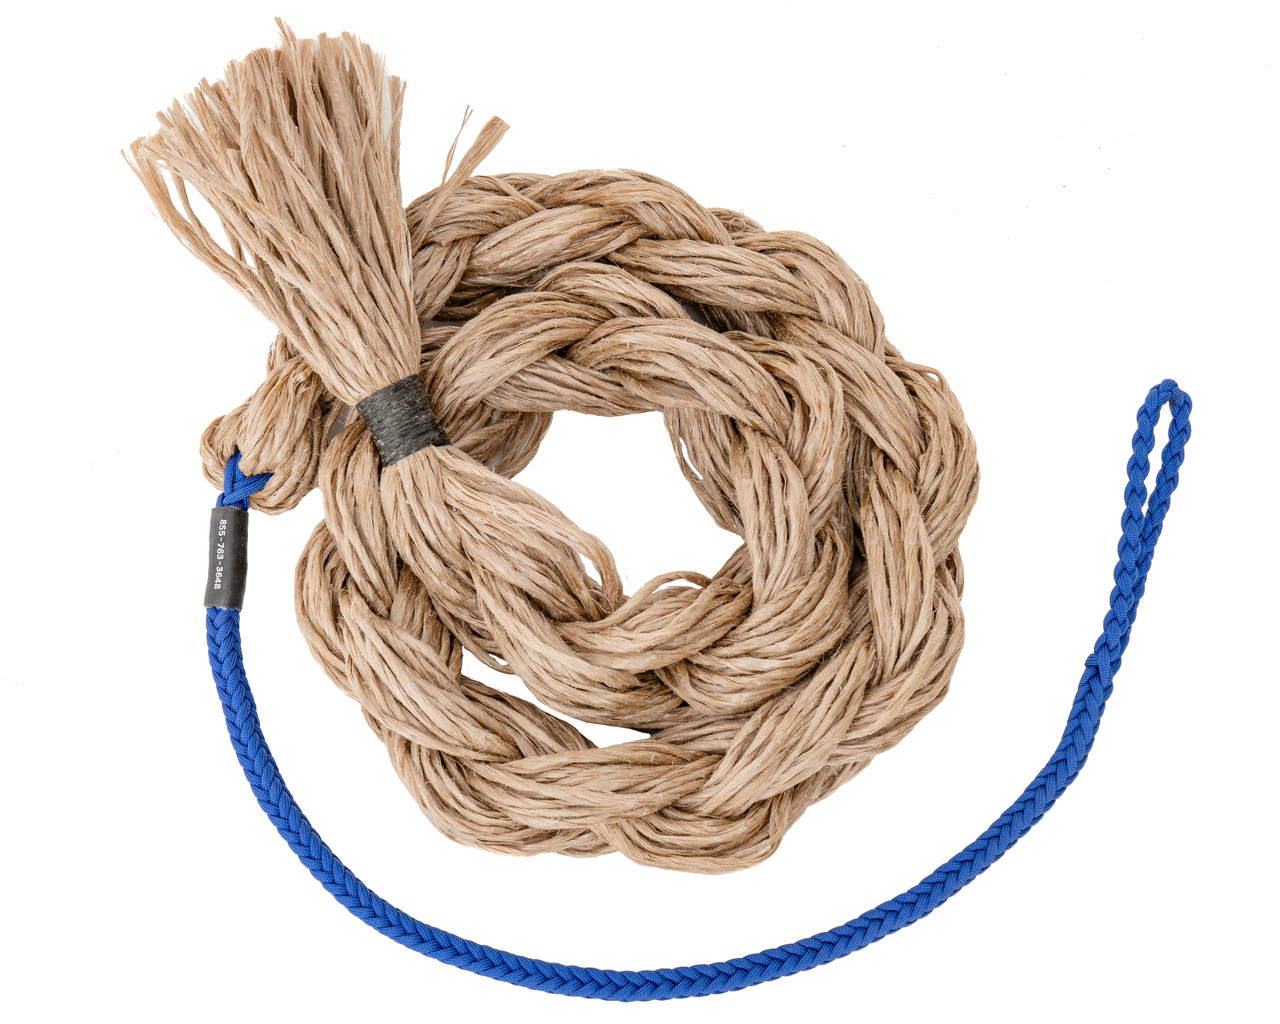 Leather Rope Bronc Rein Split 7ft - 4 Ply Bourbon Colored - Trigger Snap